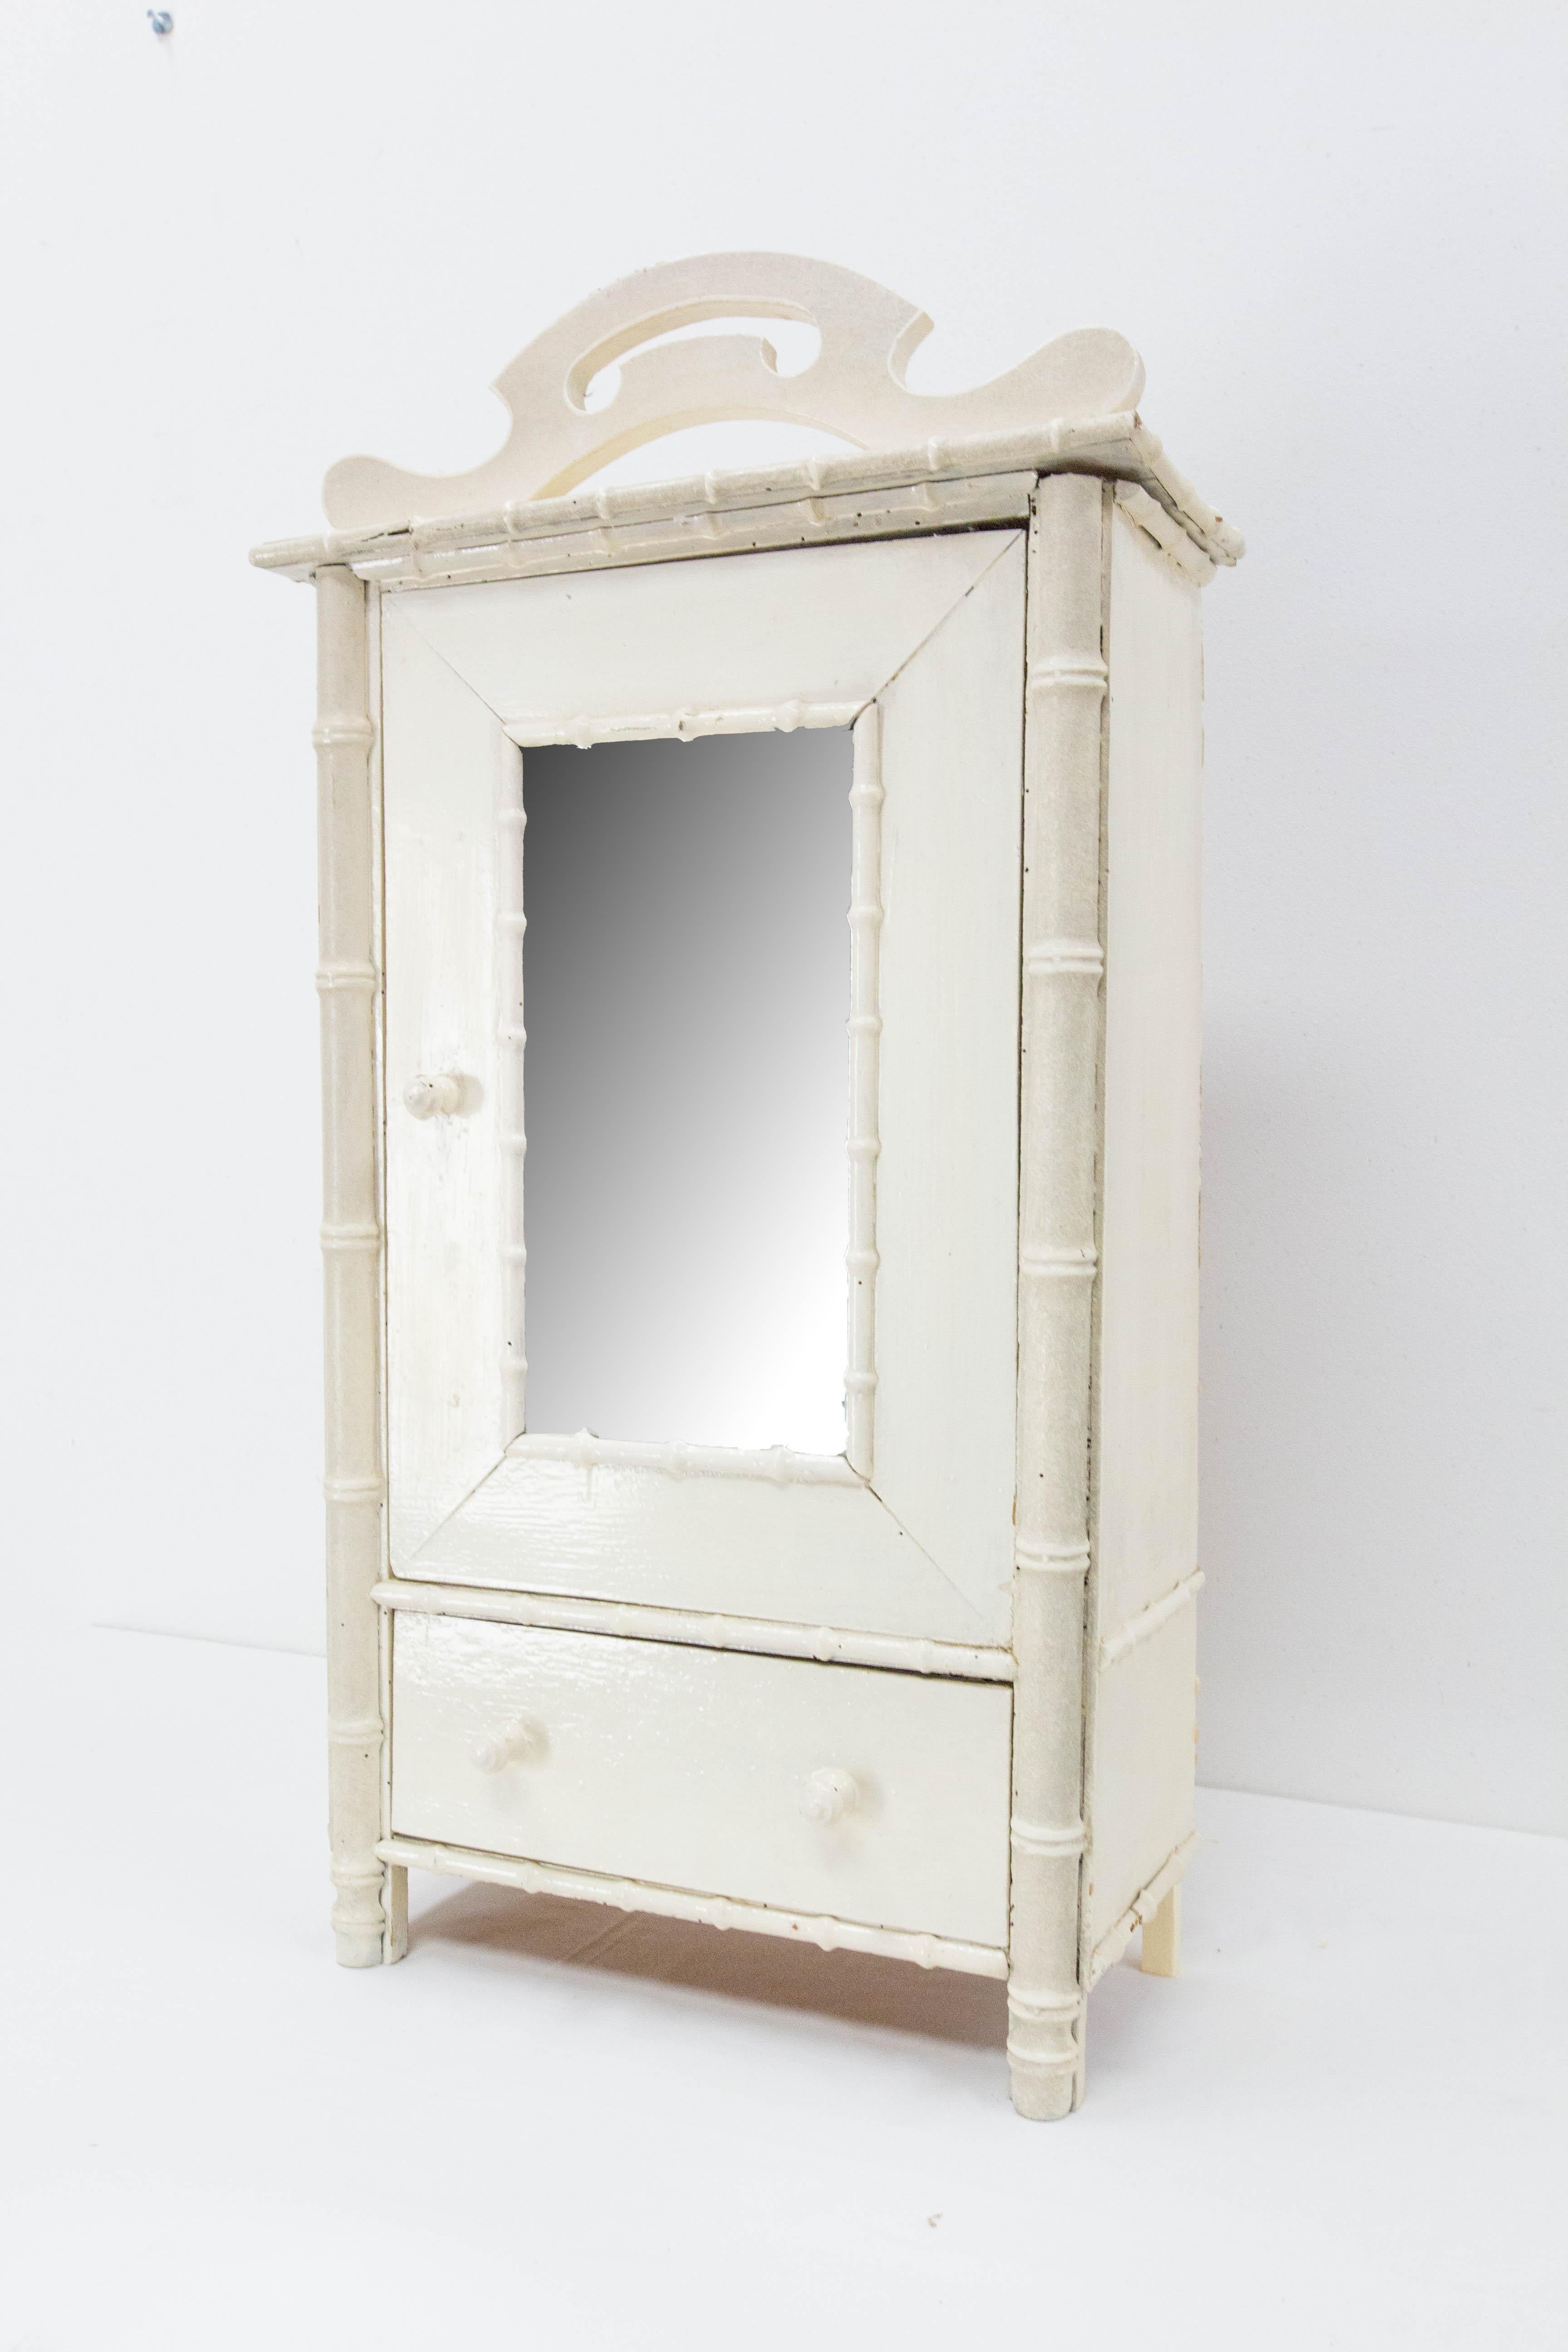 French mirror door miniature wardrobe 1900 in the bamboo style,
It can be used has a bathroom cabinet.
Oil painted.
One door with a shelve inside and one drawer.
Good condition.

Shipping:
L35.5 P16 H67 3.8kg.
 